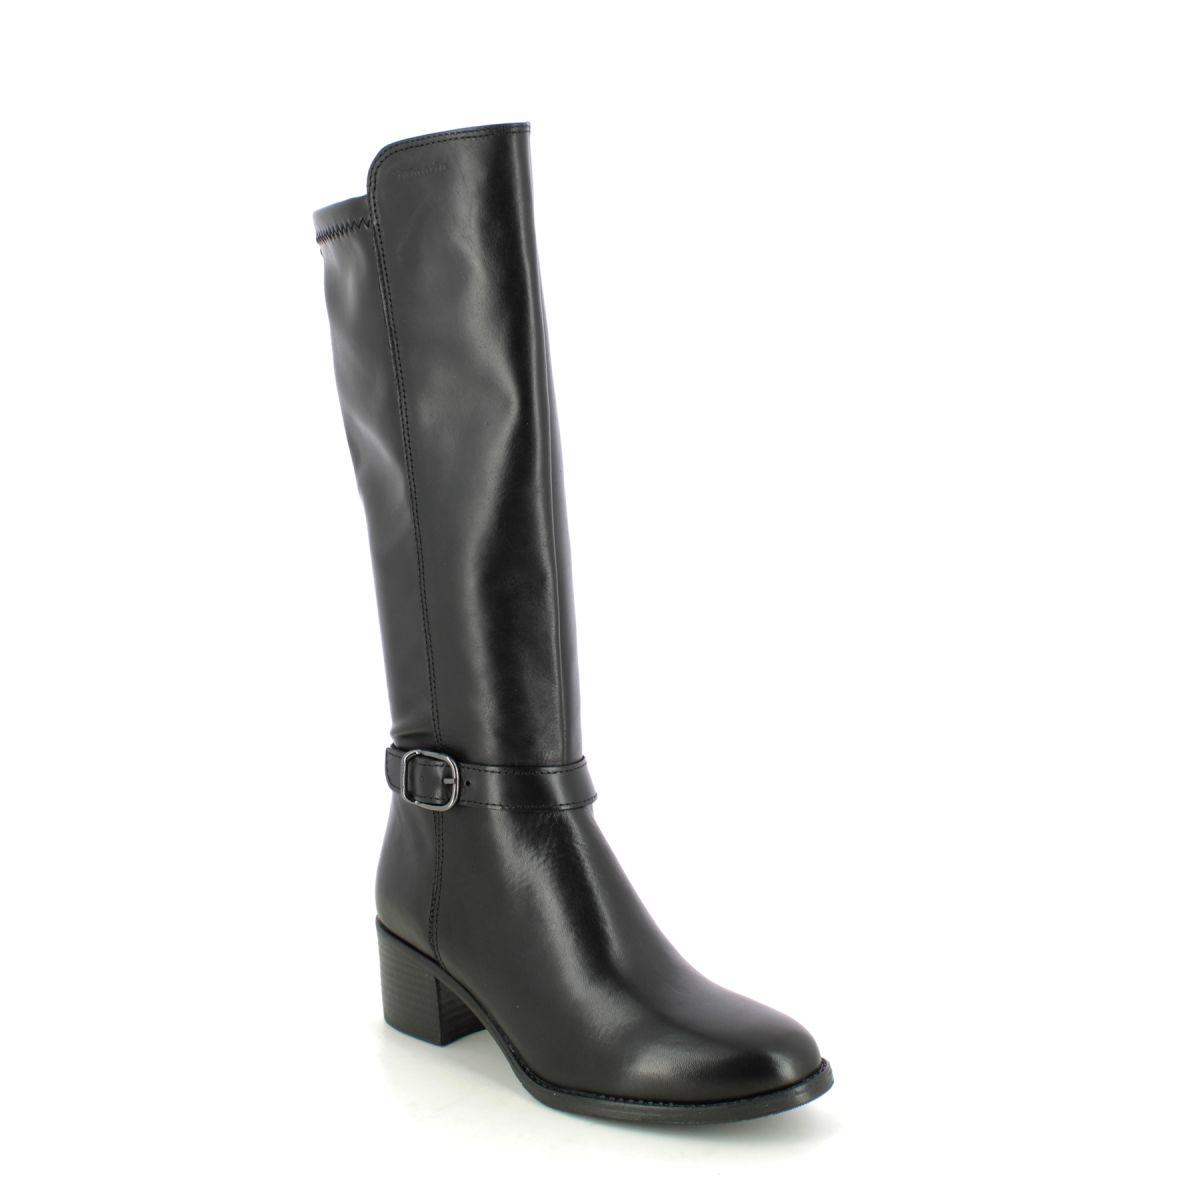 Tamaris Paulettalong Black Leather Womens Knee-High Boots 25530-27-001 In Size 38 In Plain Black Leather